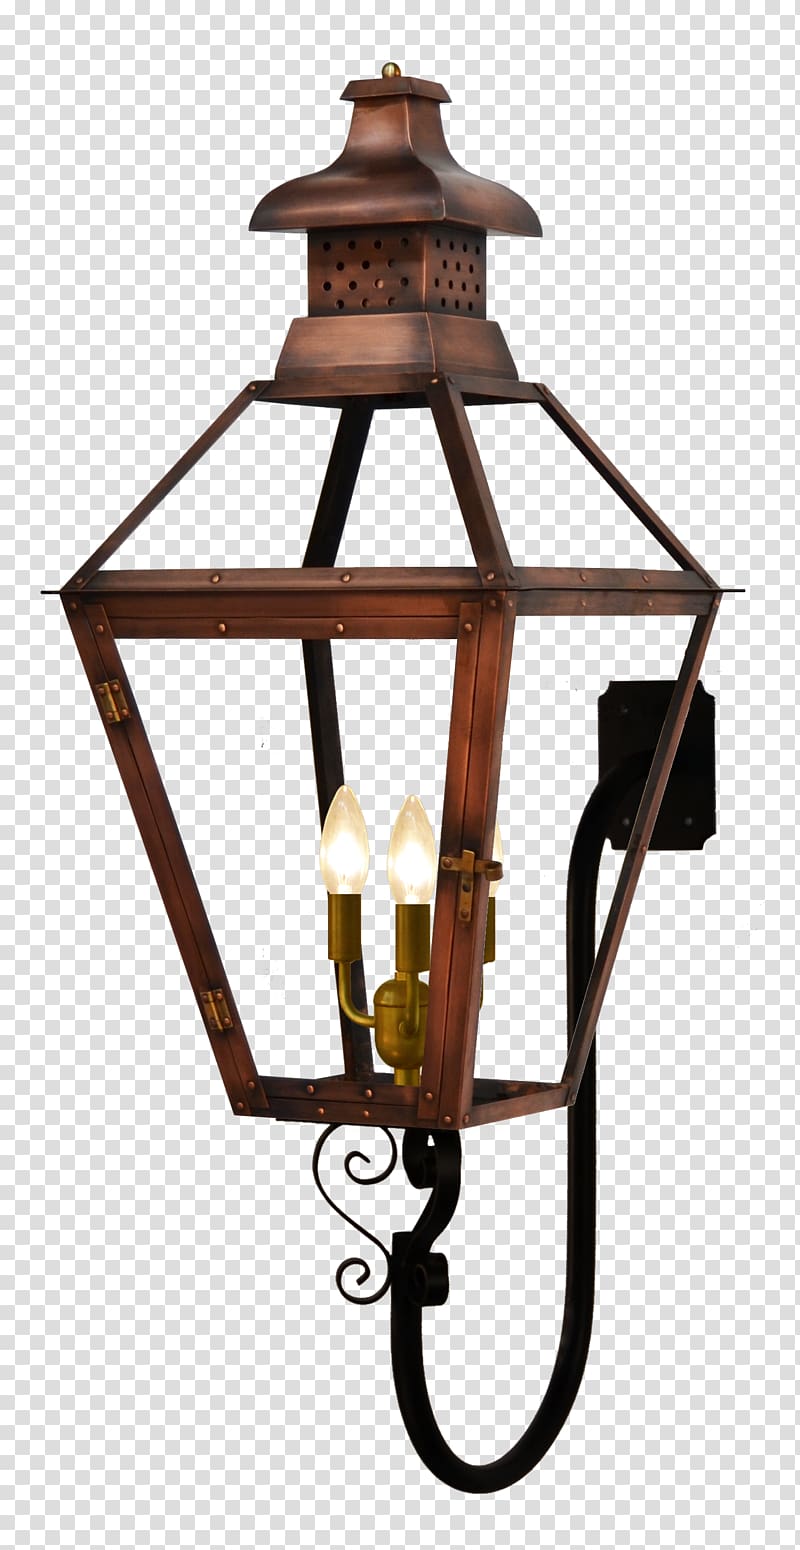 Gas lighting Lantern Sconce, kongming latern transparent background PNG clipart